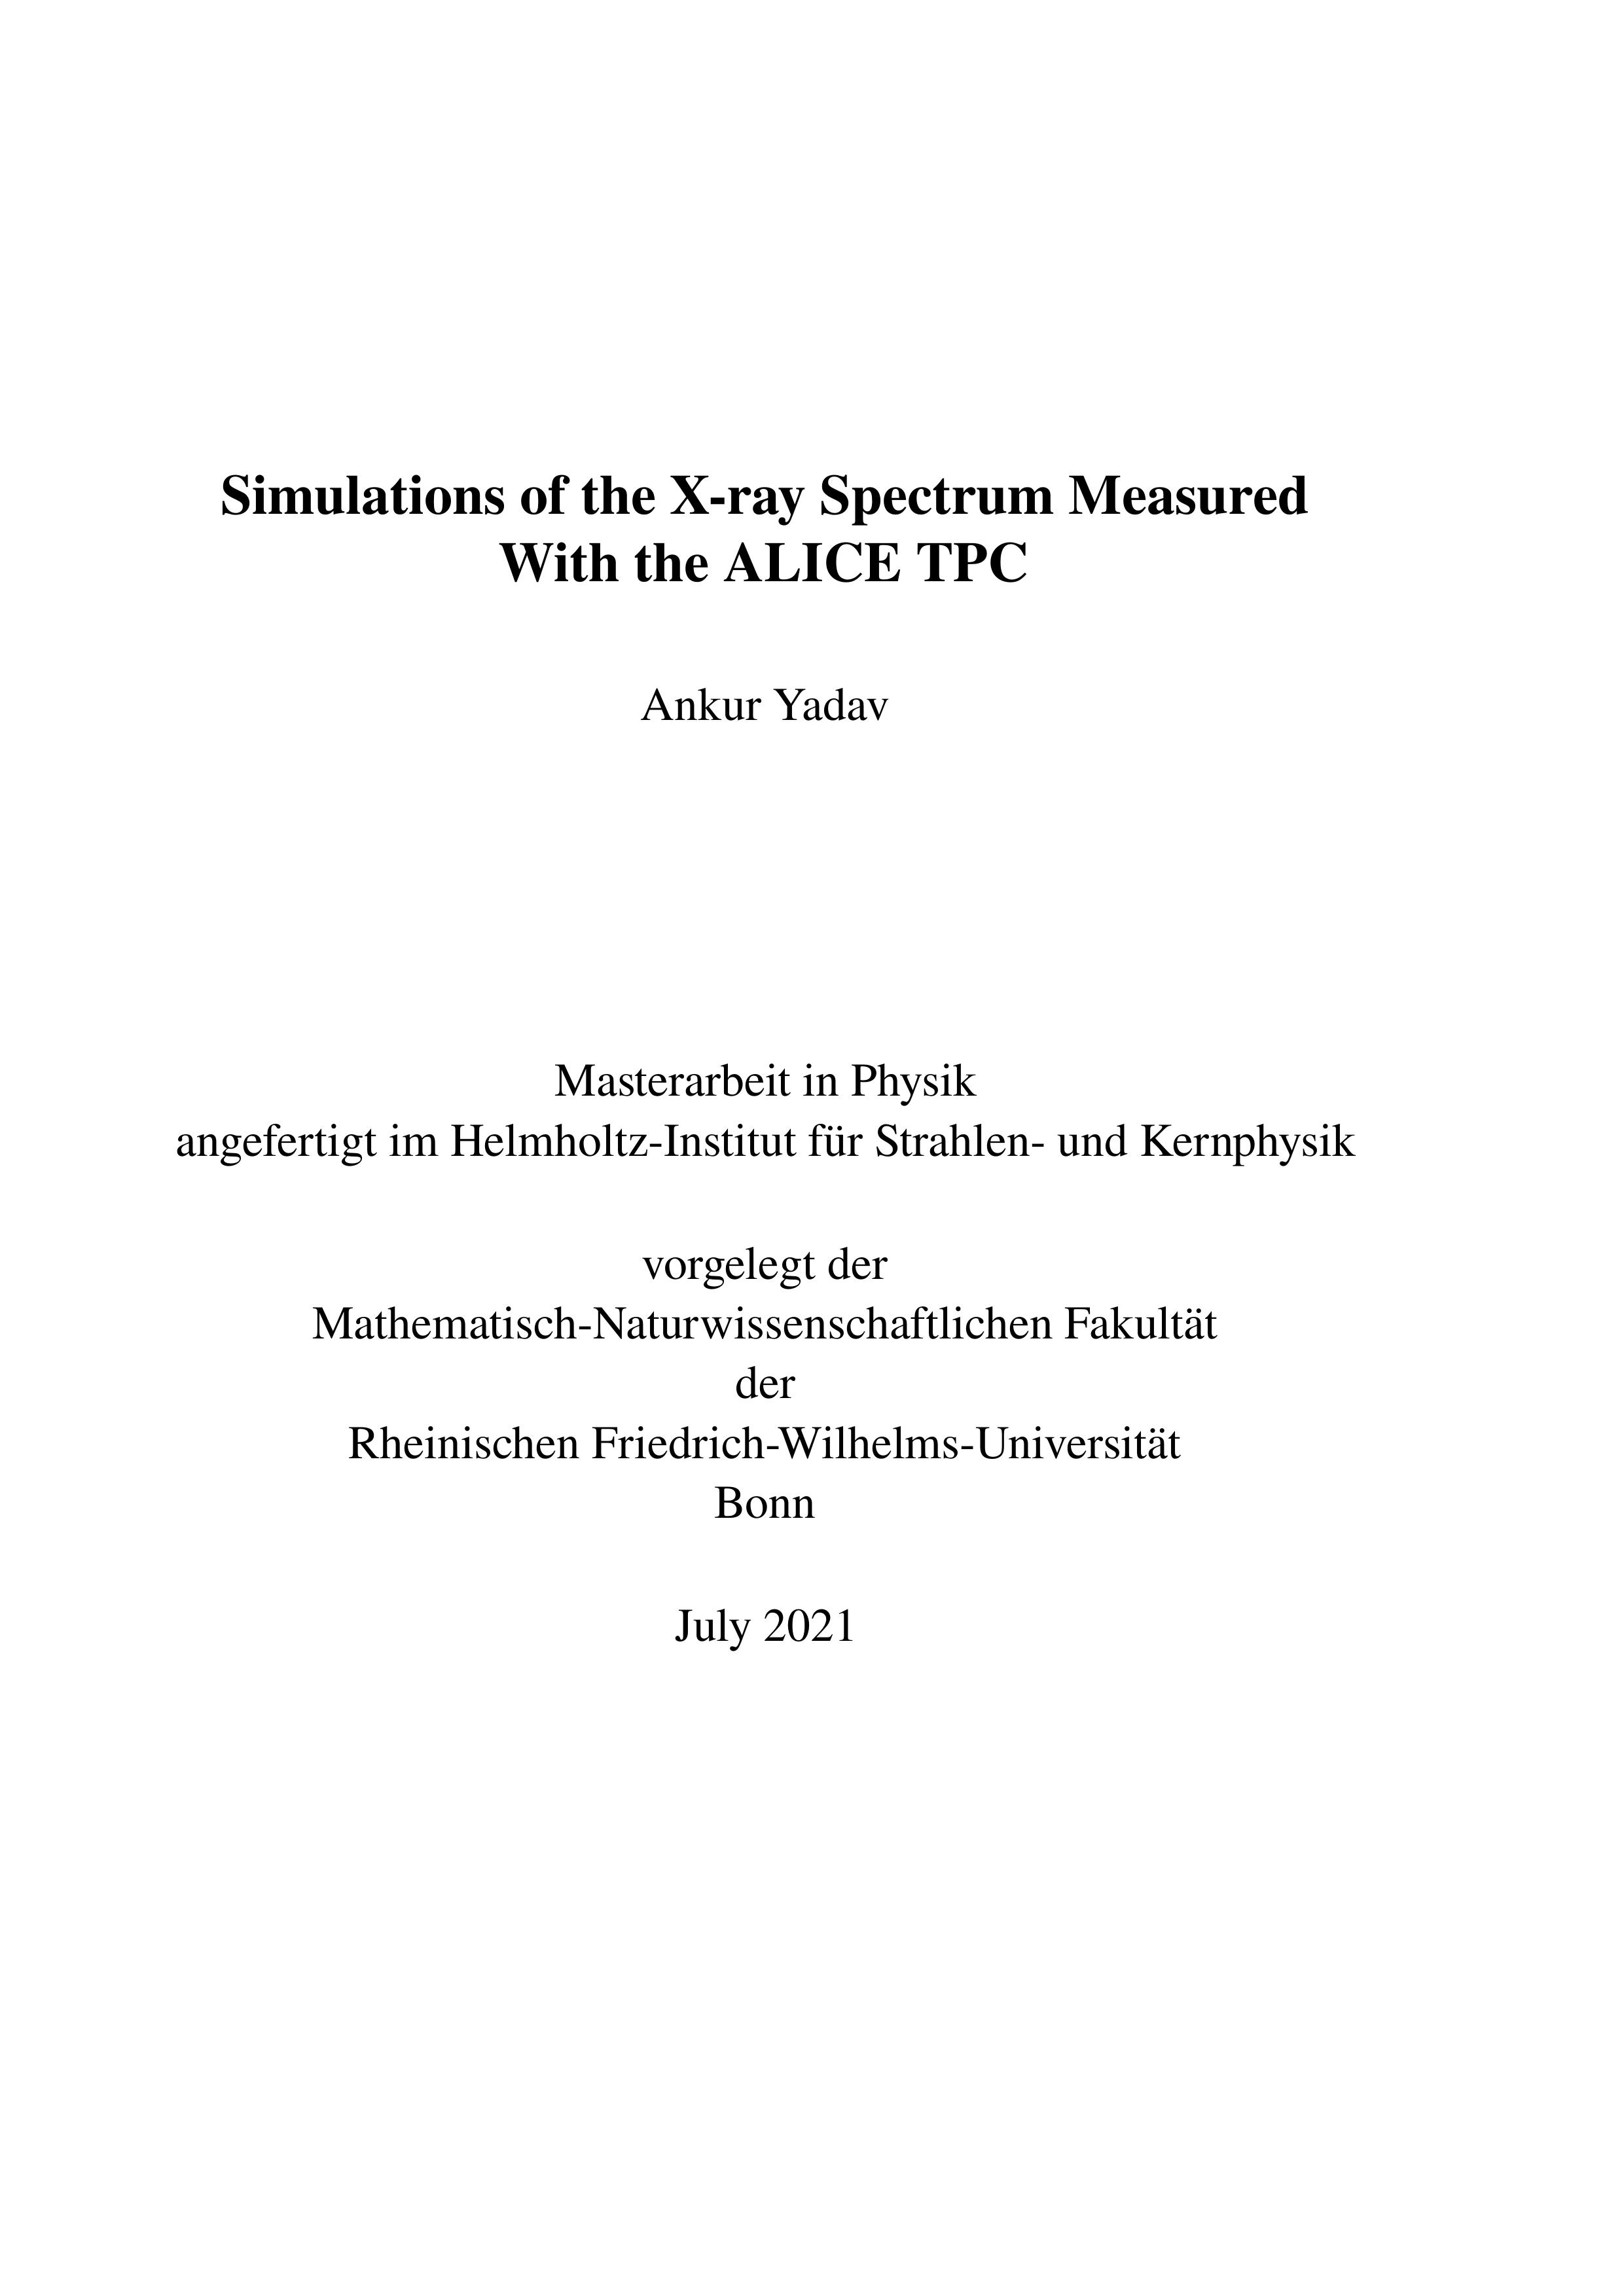 Simulations of the X-ray Spectrum Measured With the ALICE TPC